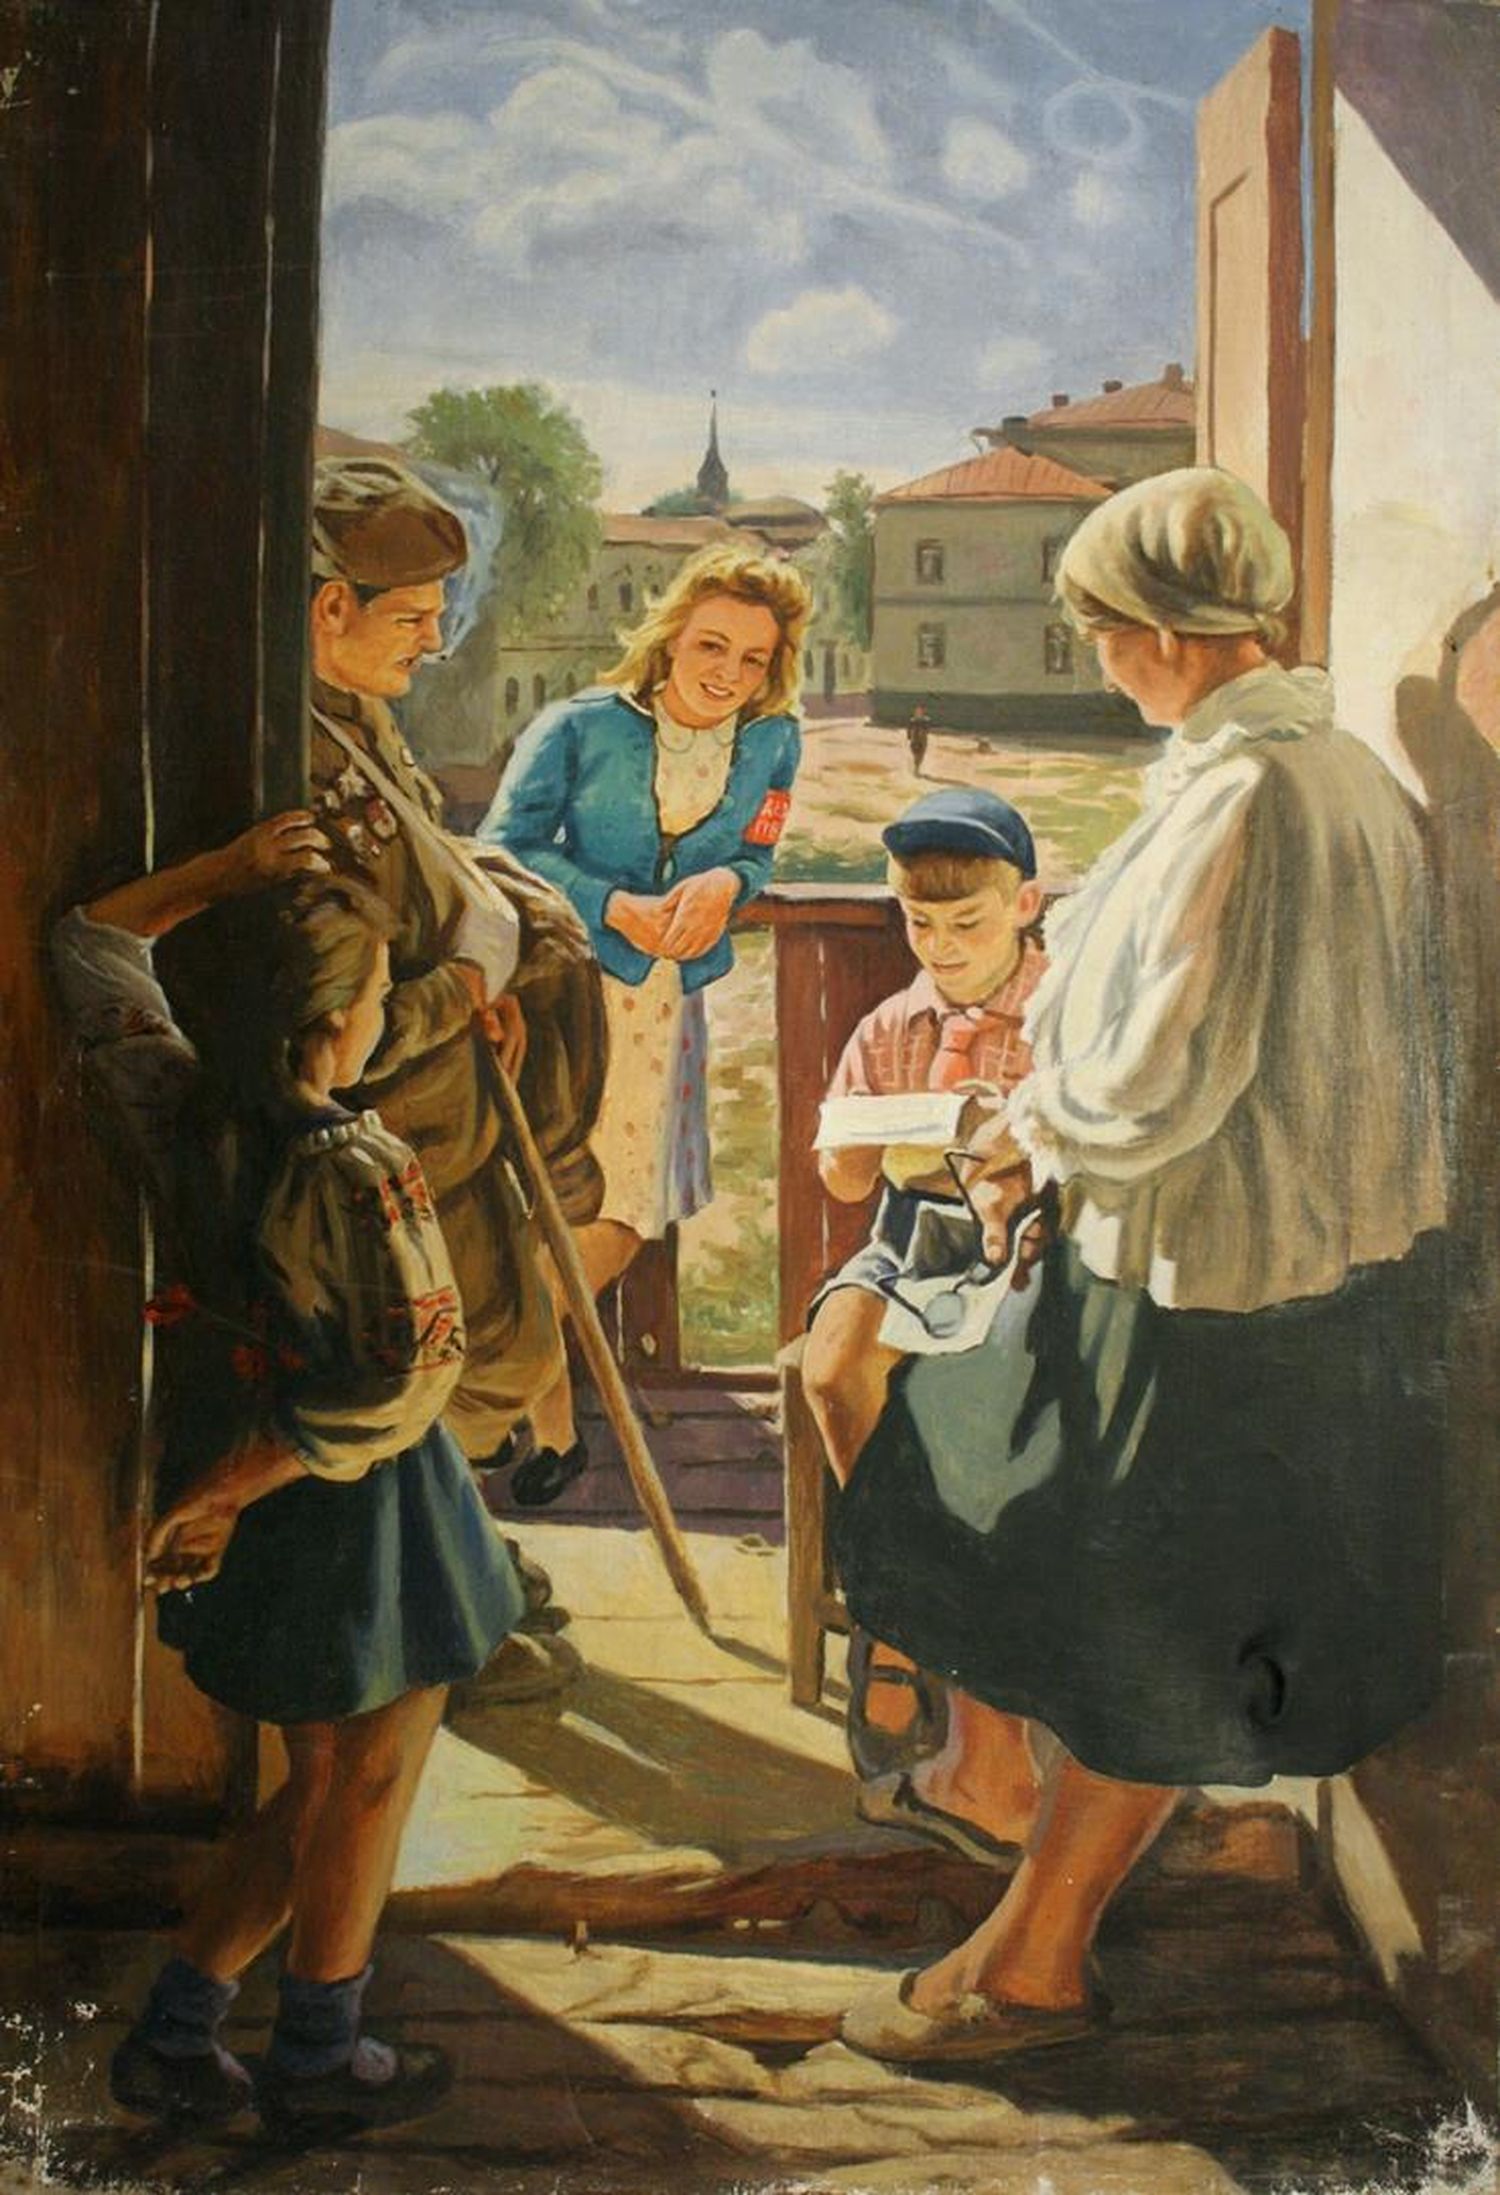 "Letter from the front (copy of A.I. Laktionov 1947)"